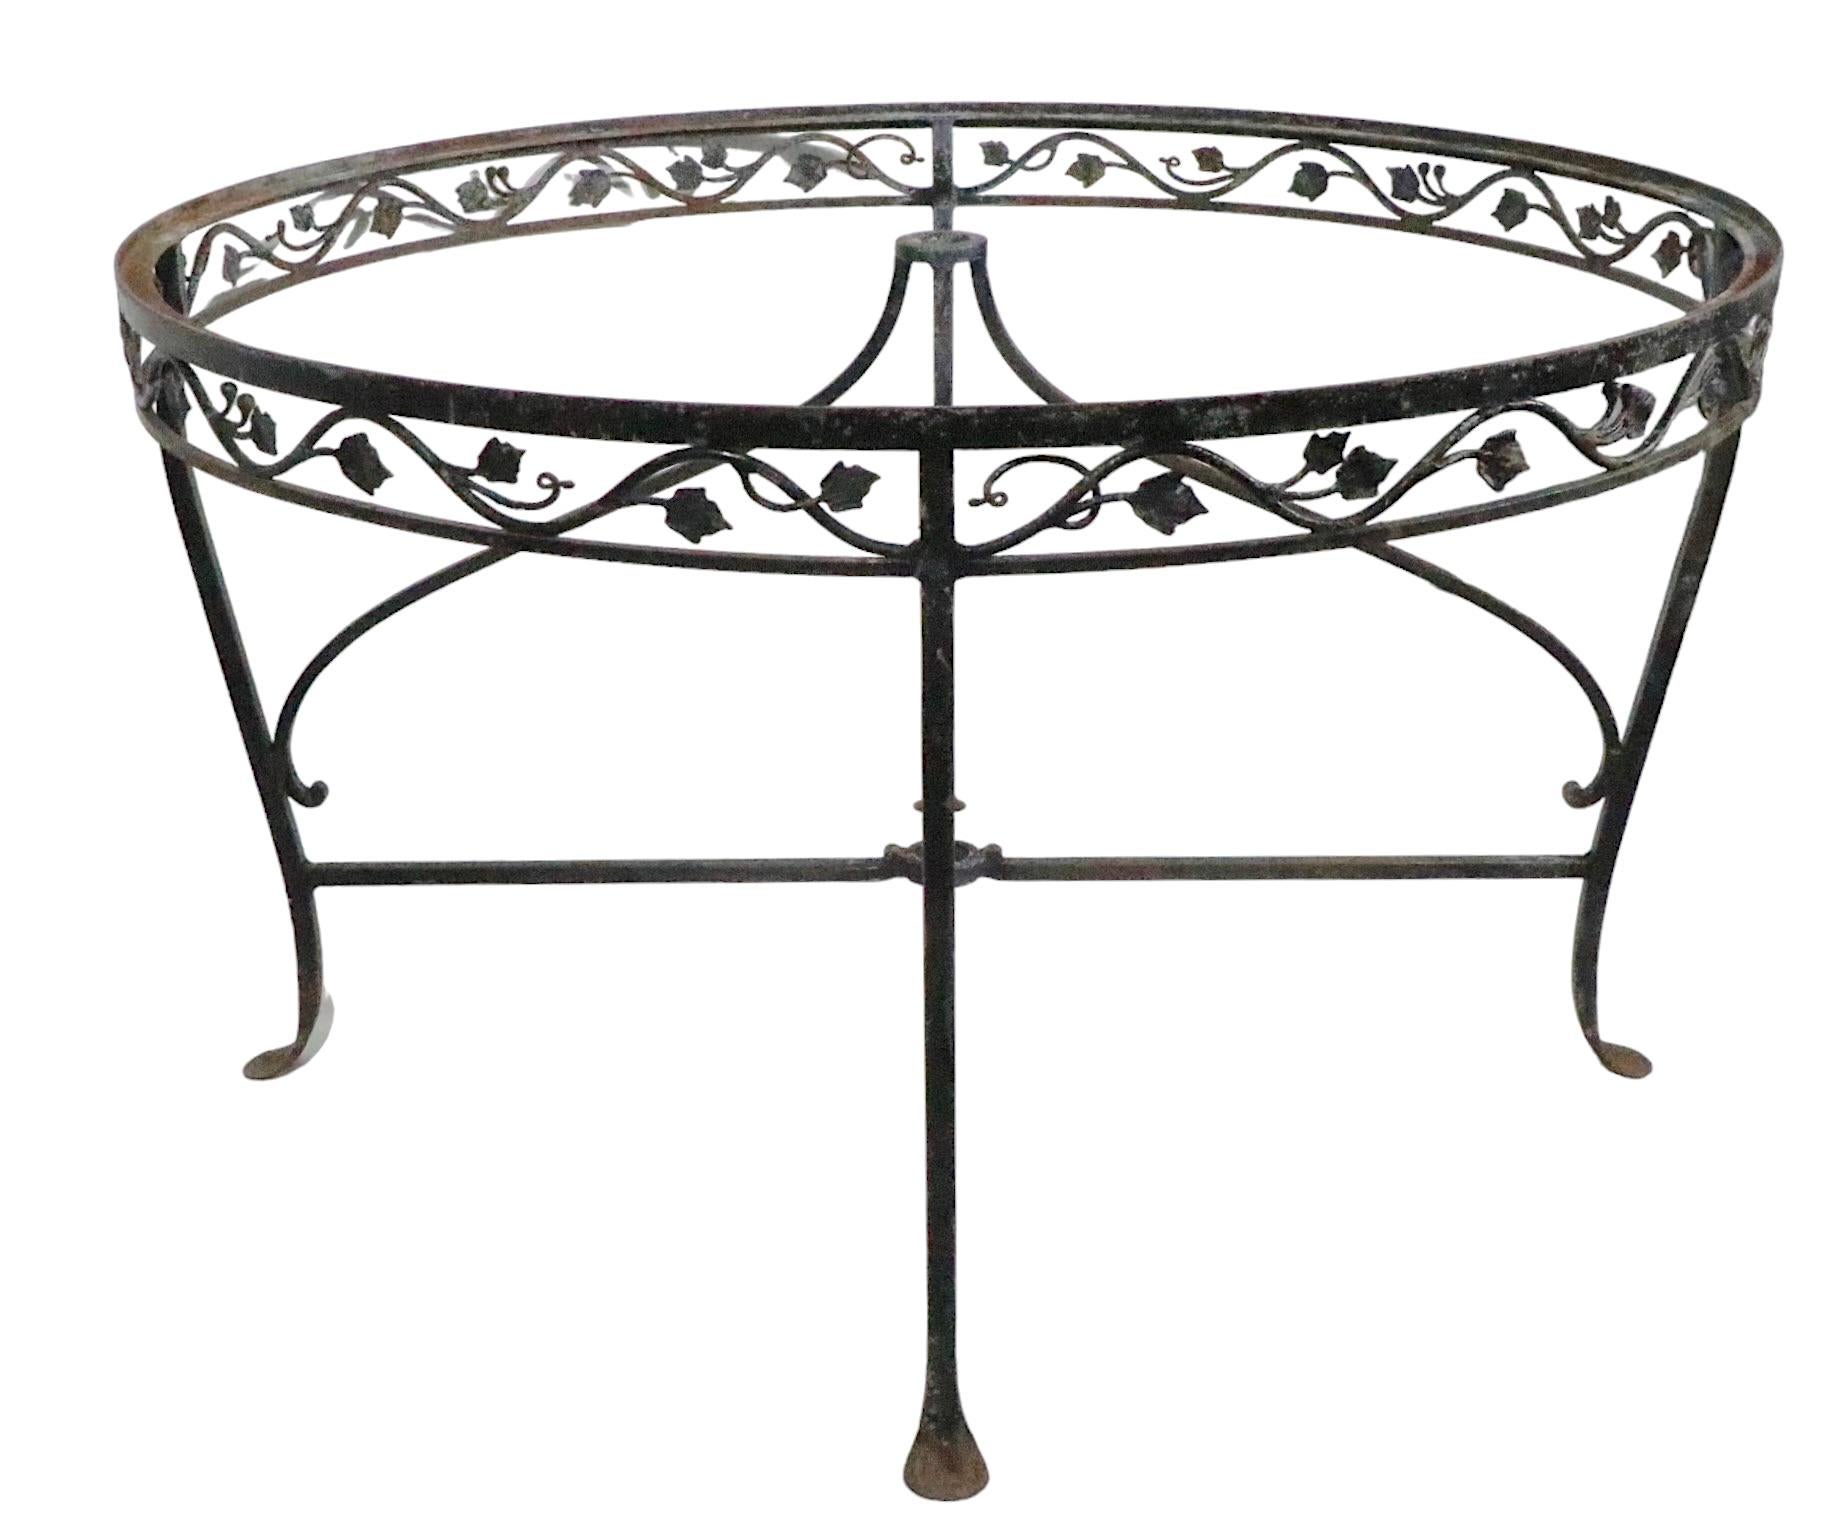 Exceptional wrought iron dining table having an ornate foliate motif skirt, curved legs and paw feet. The table is designed to accept a sun umbrella in the center, having a support directly under the glass top and a second support at the